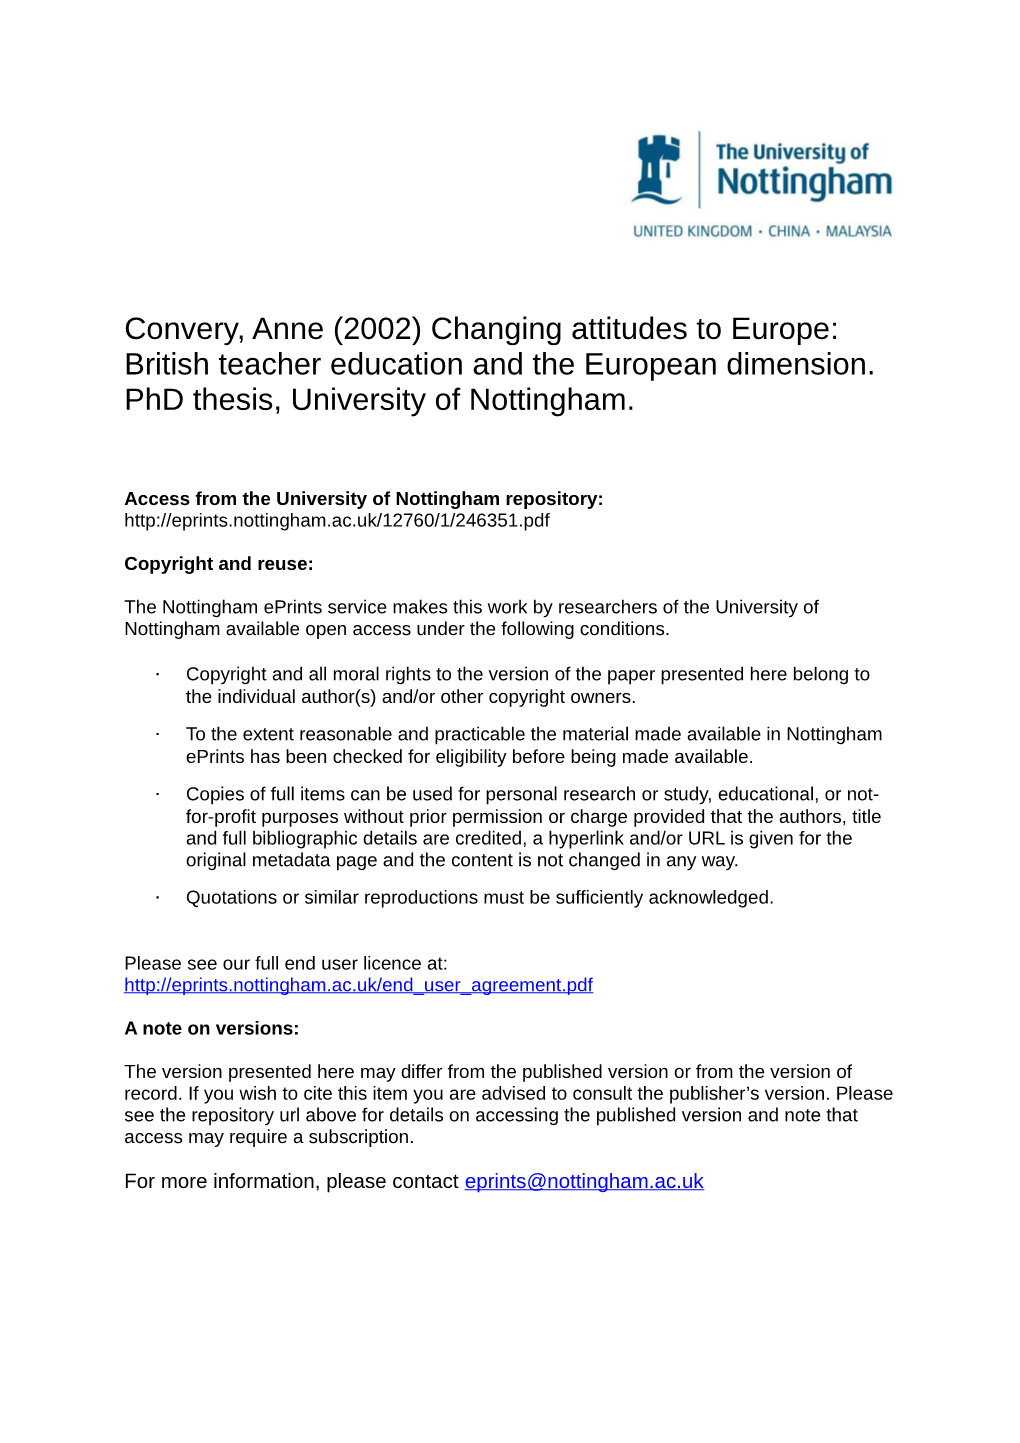 British Teacher Education and the European Dimension. Phd Thesis, University of Nottingham